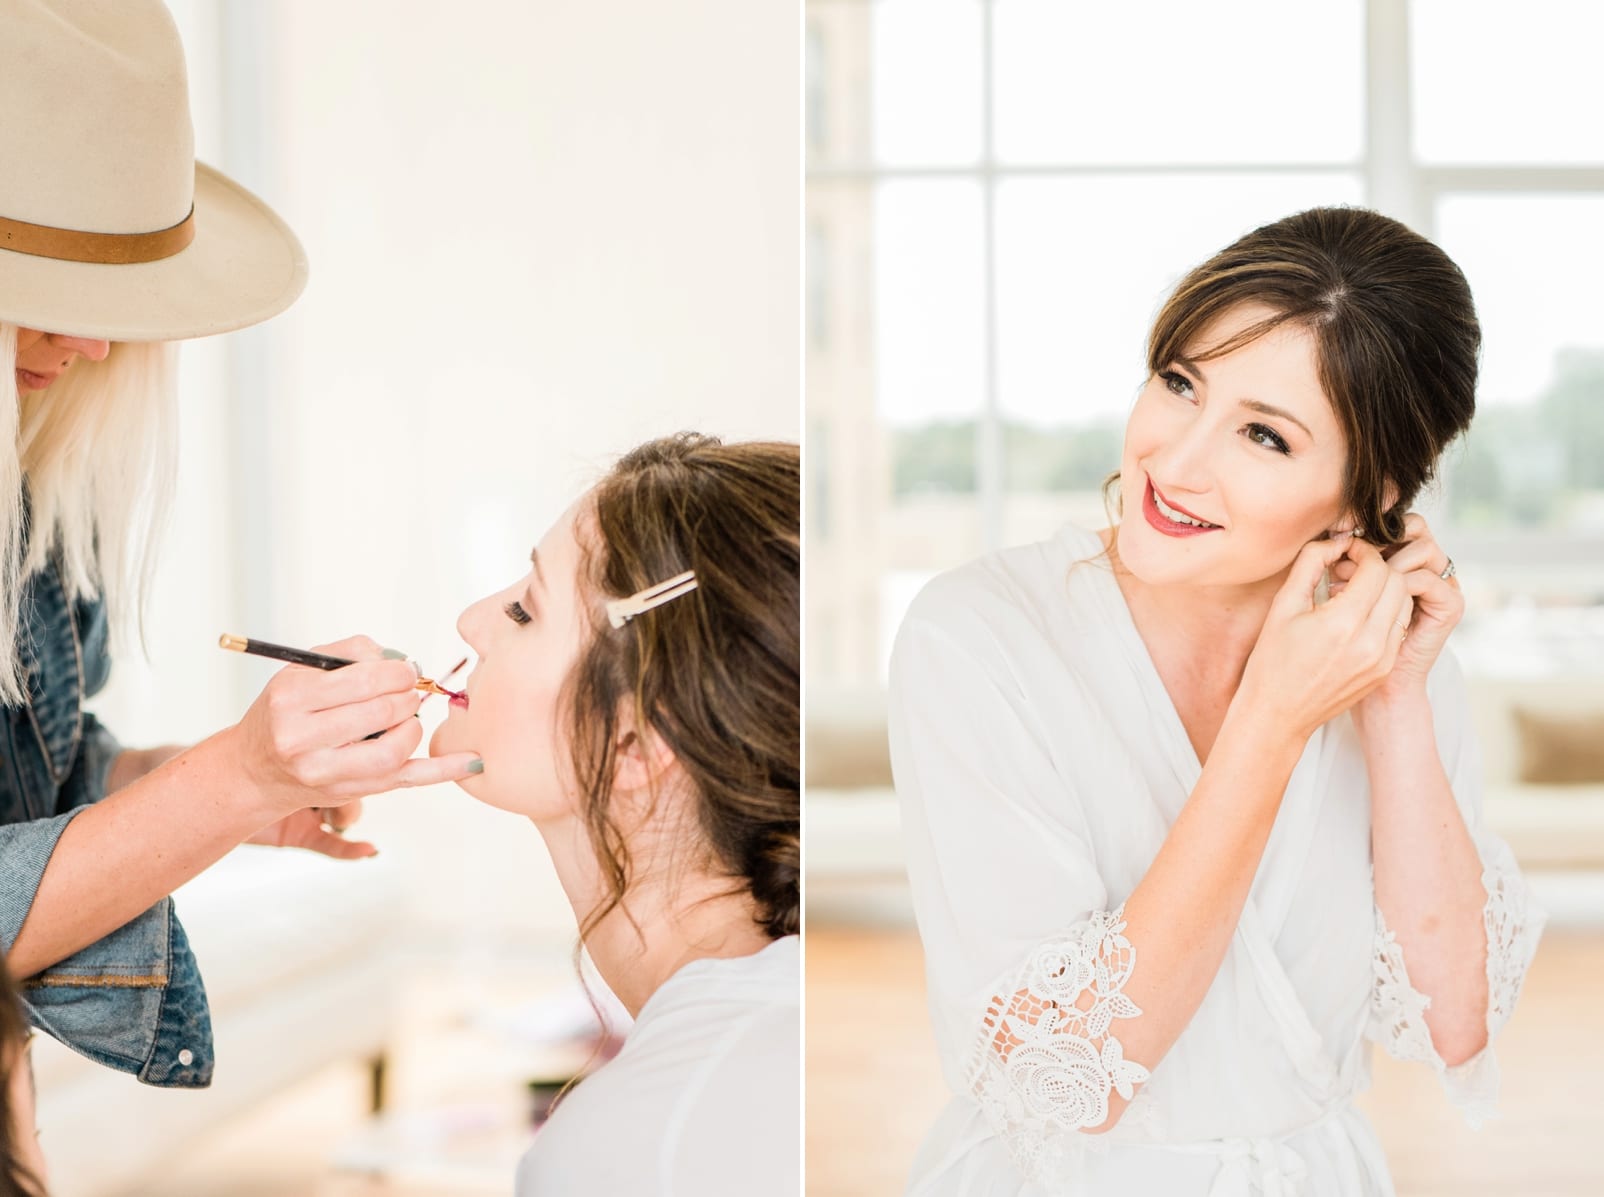 The Glass Box bride getting her make up down in a white robe with lace sleeves photo